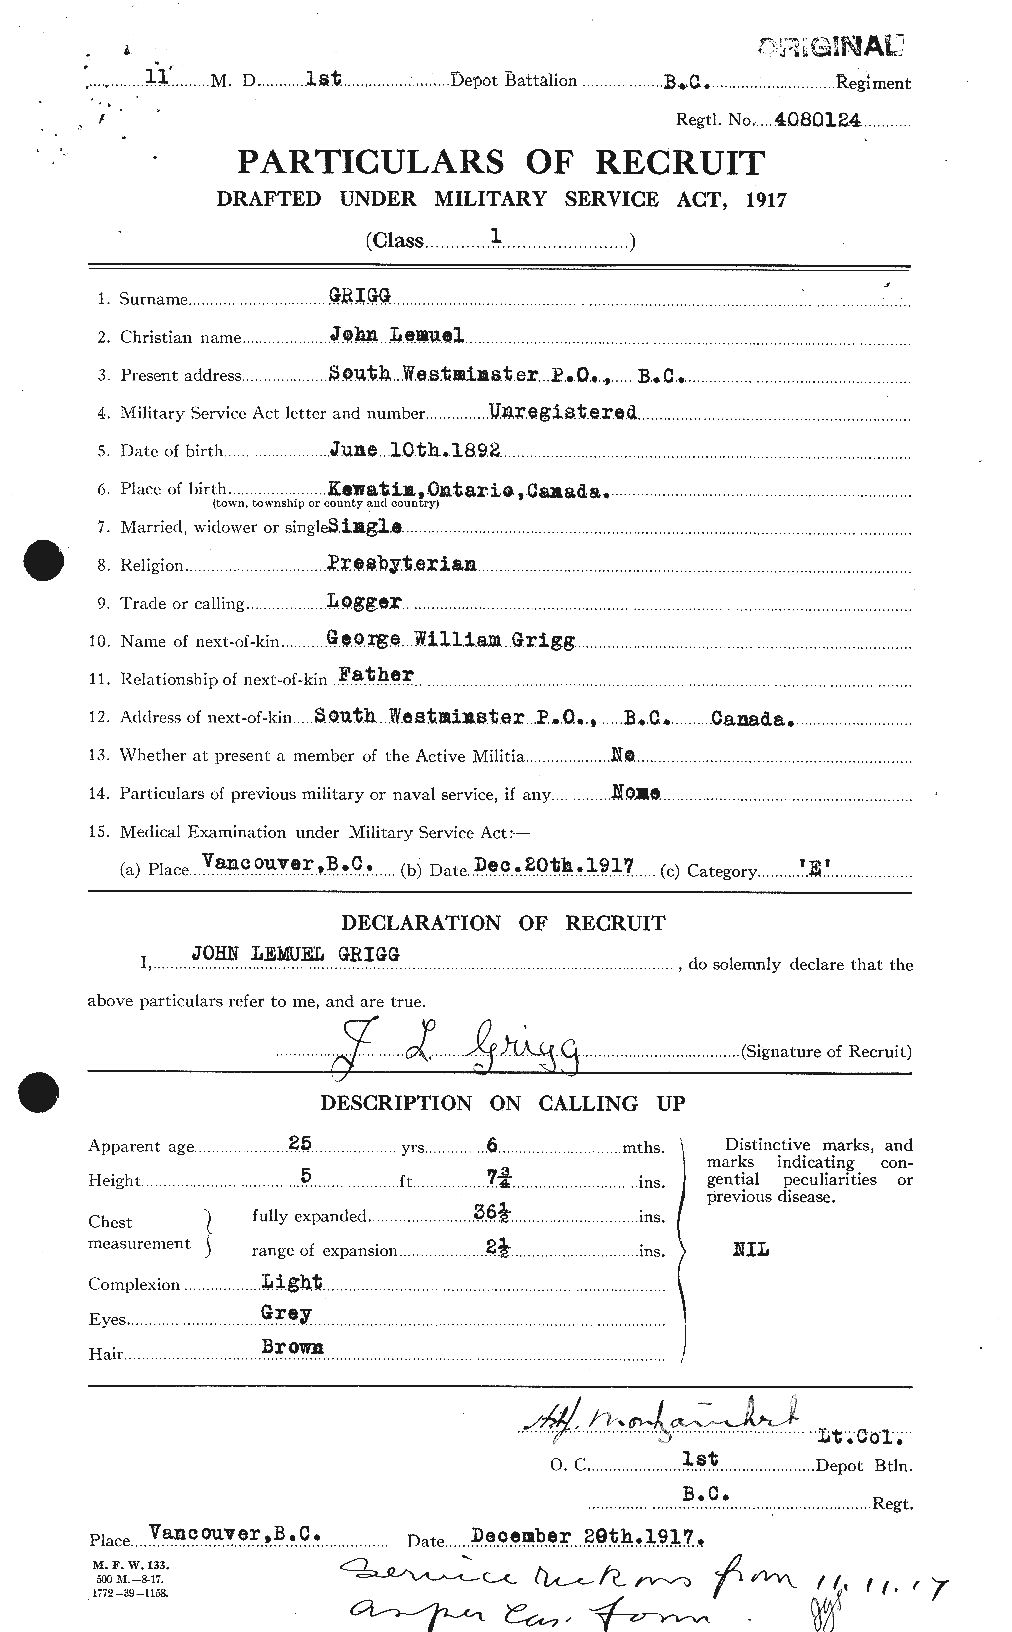 Personnel Records of the First World War - CEF 365878a